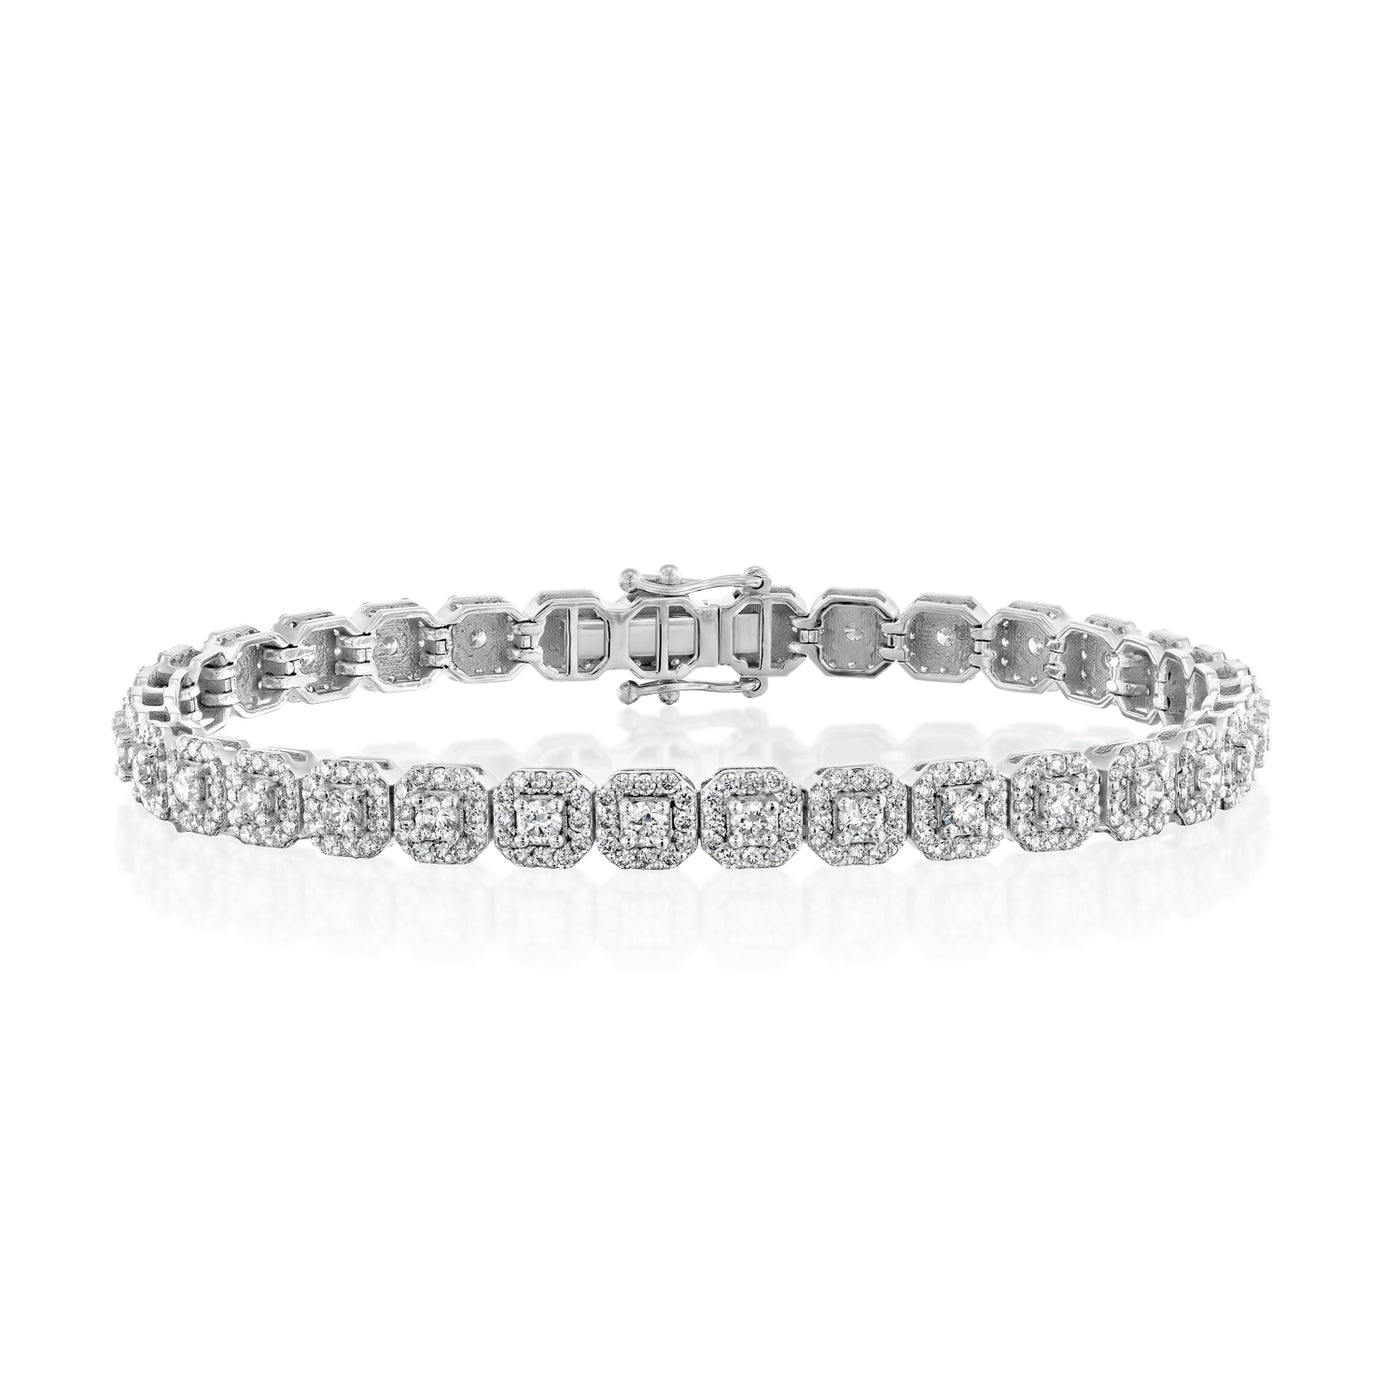 This unique diamond tennis bracelet features stunning pave set diamond clusters on cushion shape links that sparkle and shine with every movement.